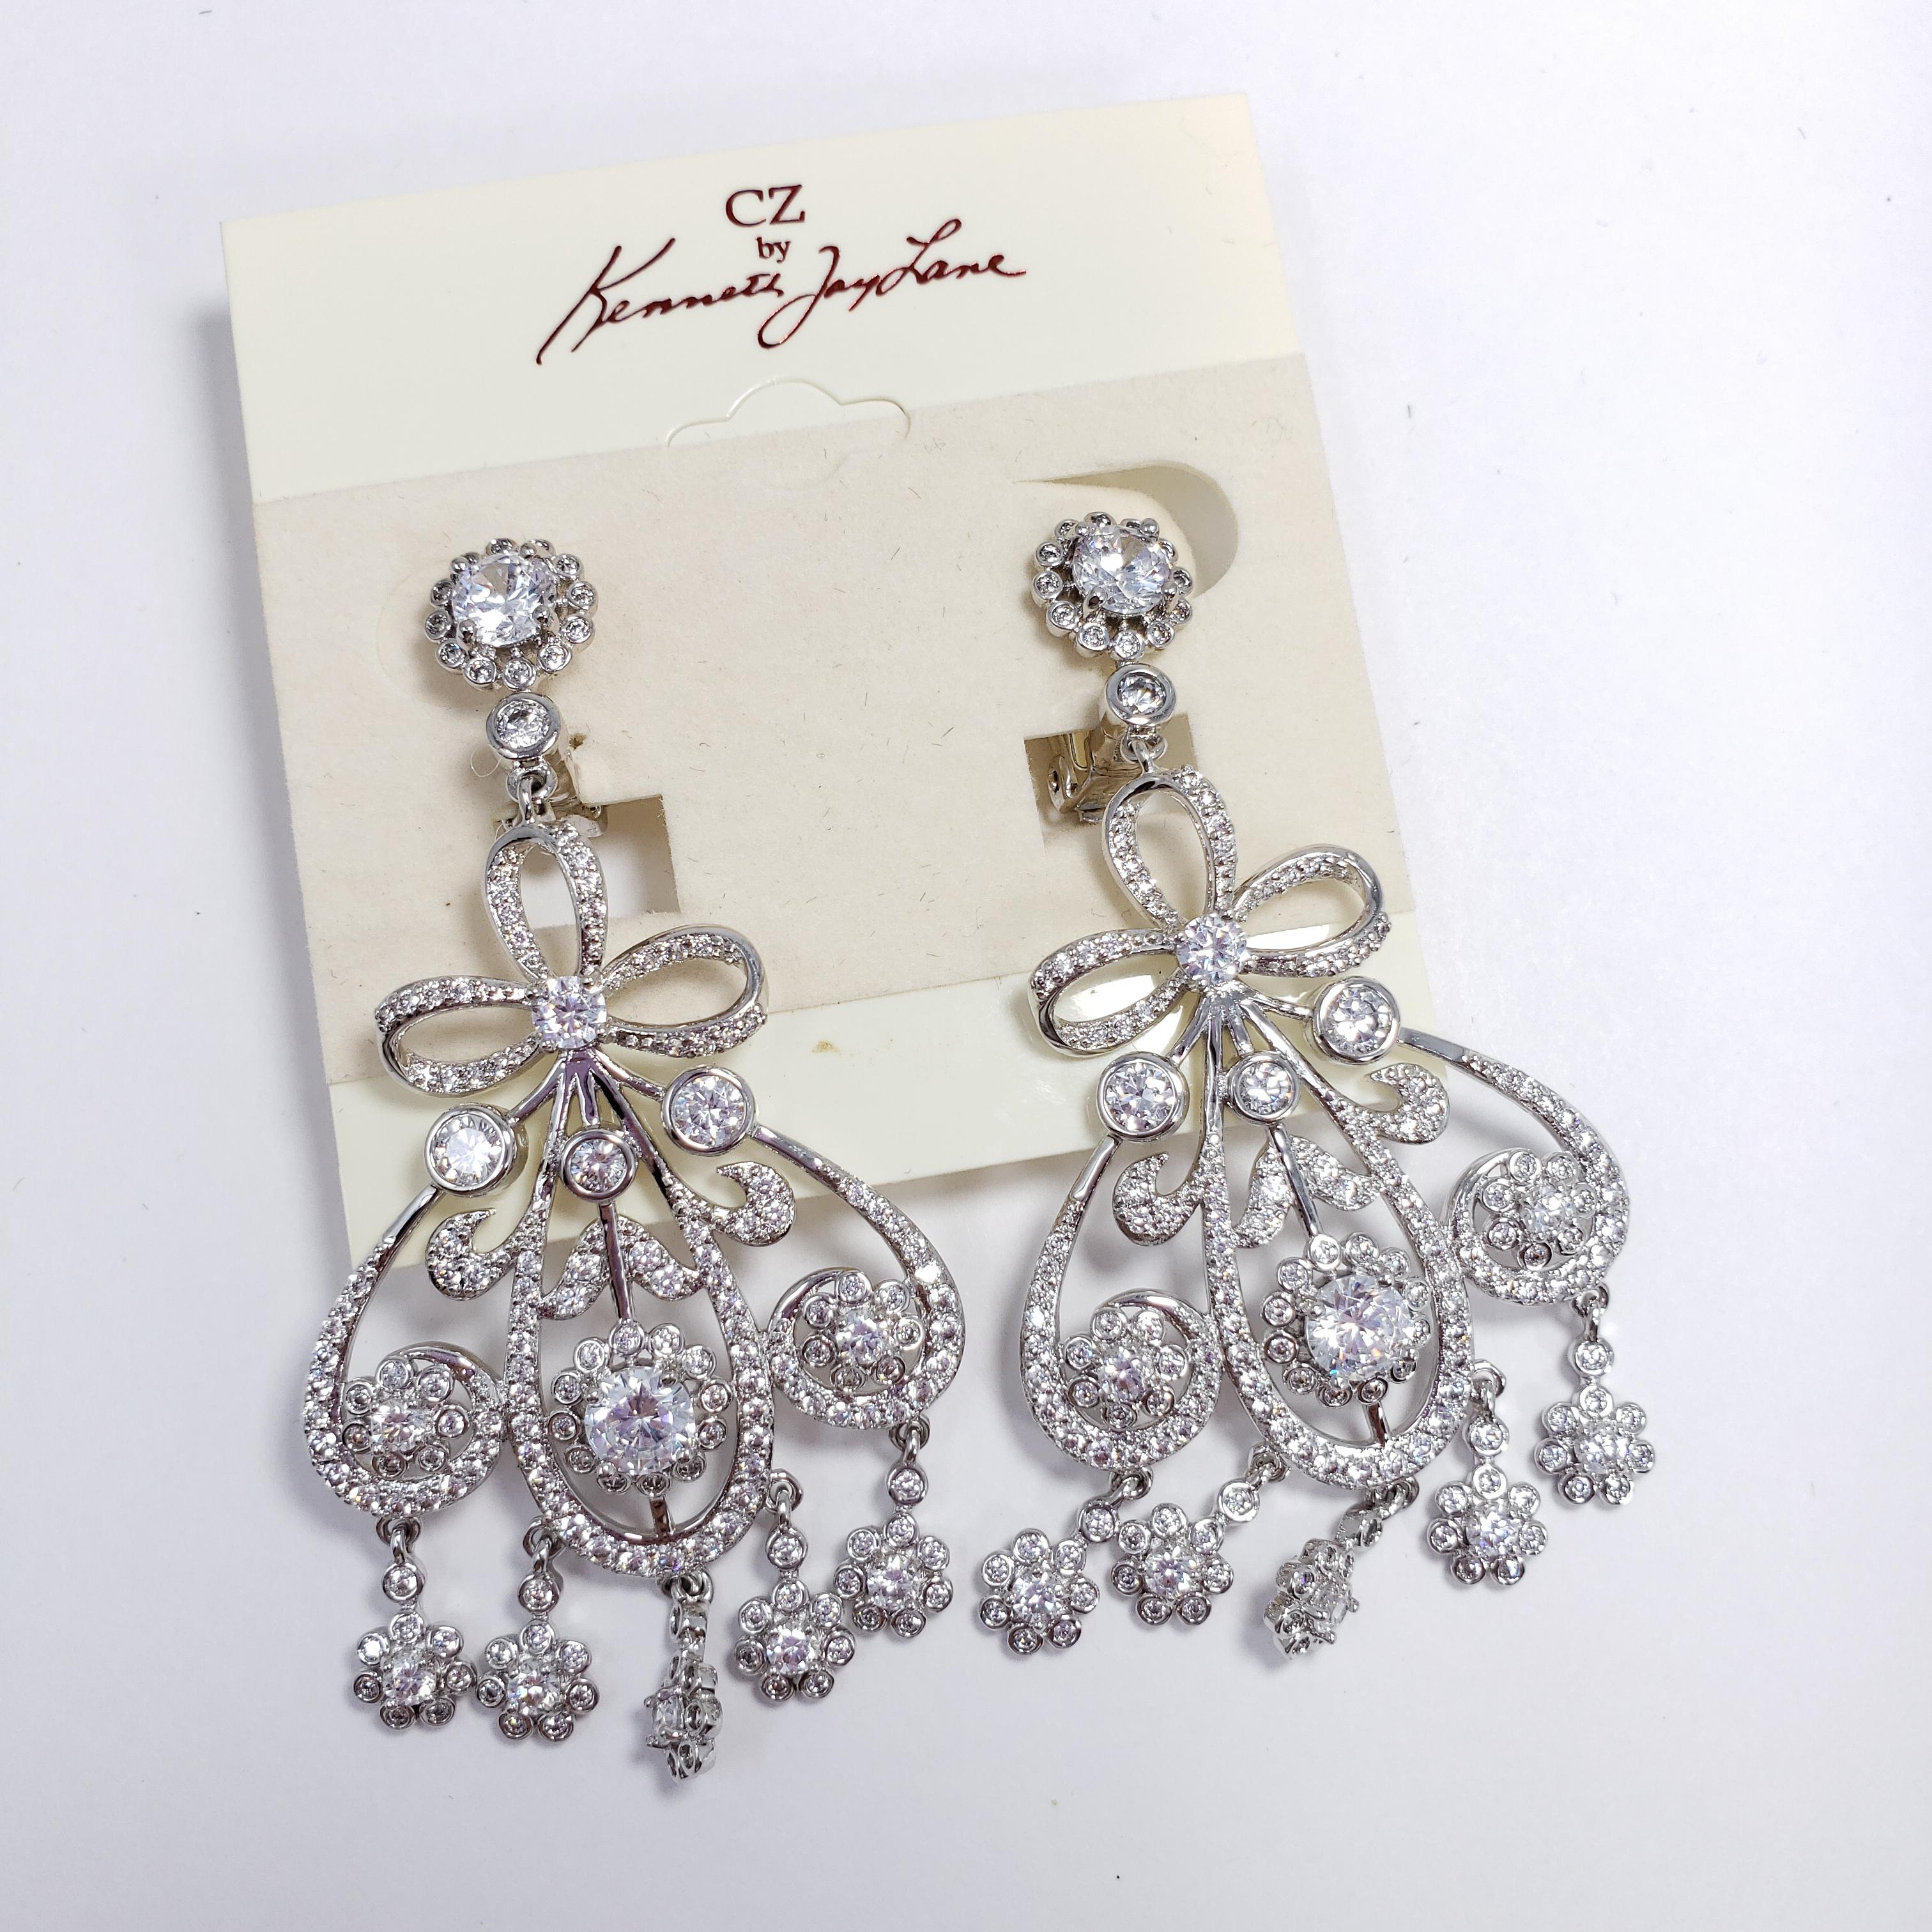 From Kenneth Jay Lane's Cubic Zirconia line. Exquisite art-nouveau inspired silver-tone motifs are accented with lustrous clear cubic zirconia crystals. Large and extravagant!

Hallmarks: KJL
CZ Cubic Zirconia line by Kenneth Jay Lane. Designer